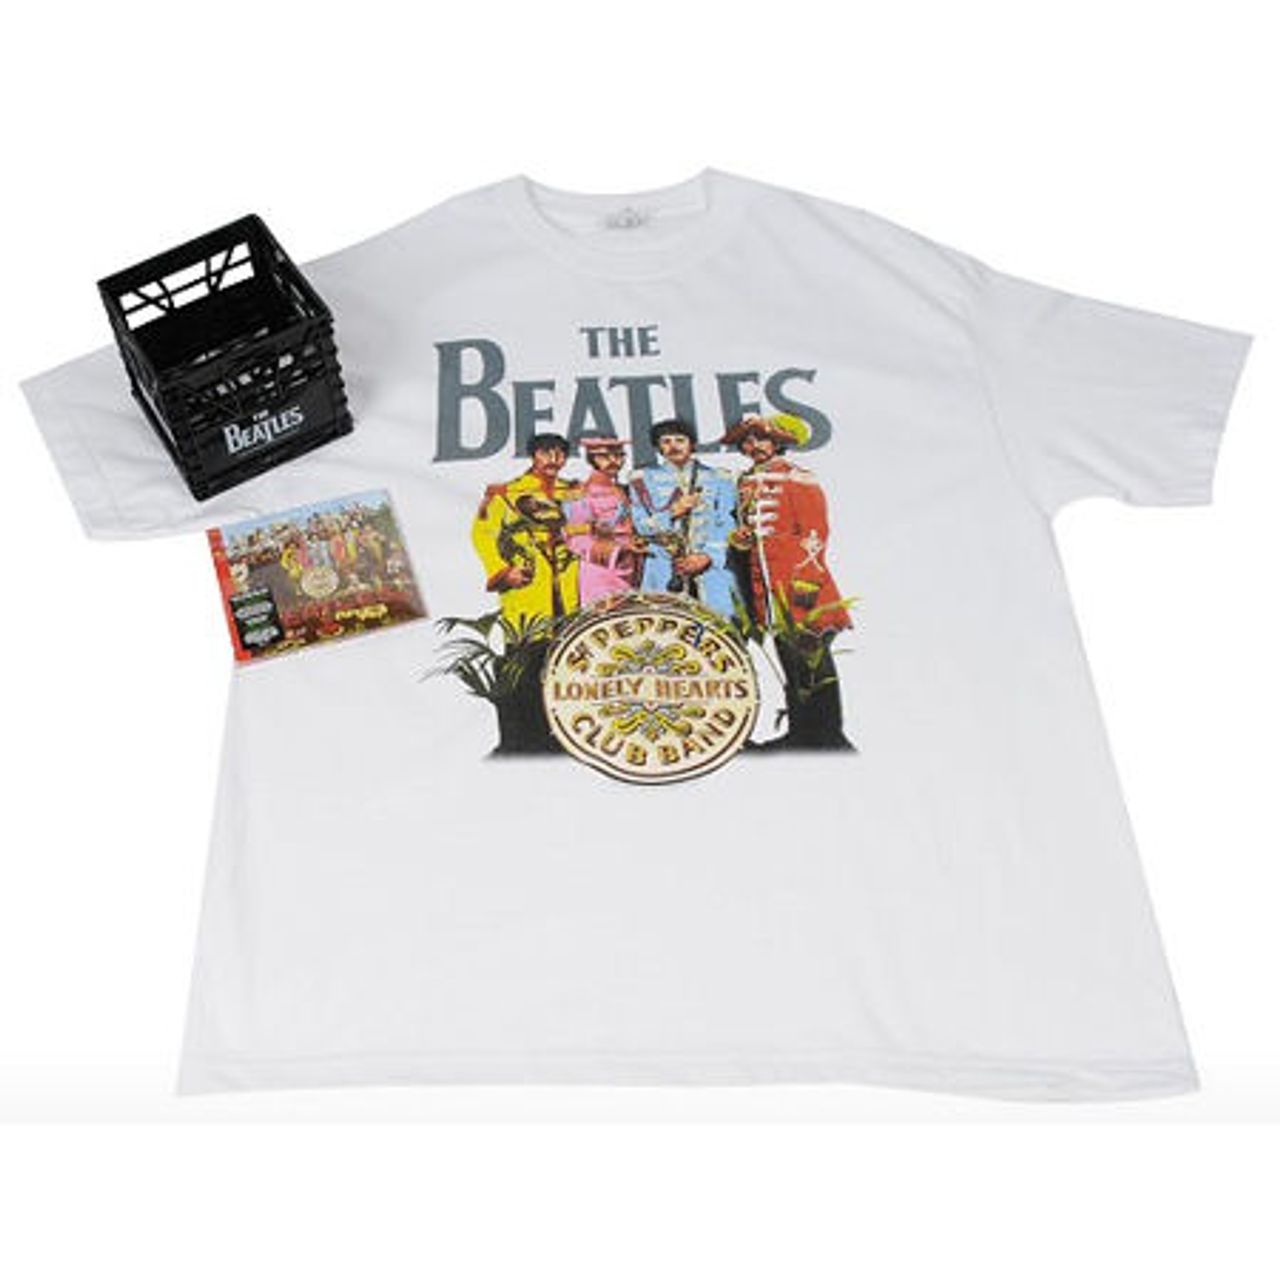 The Beatles Sgt. Pepper\'s Hearts Club Cana — T-Shirt] Band Lonely [White